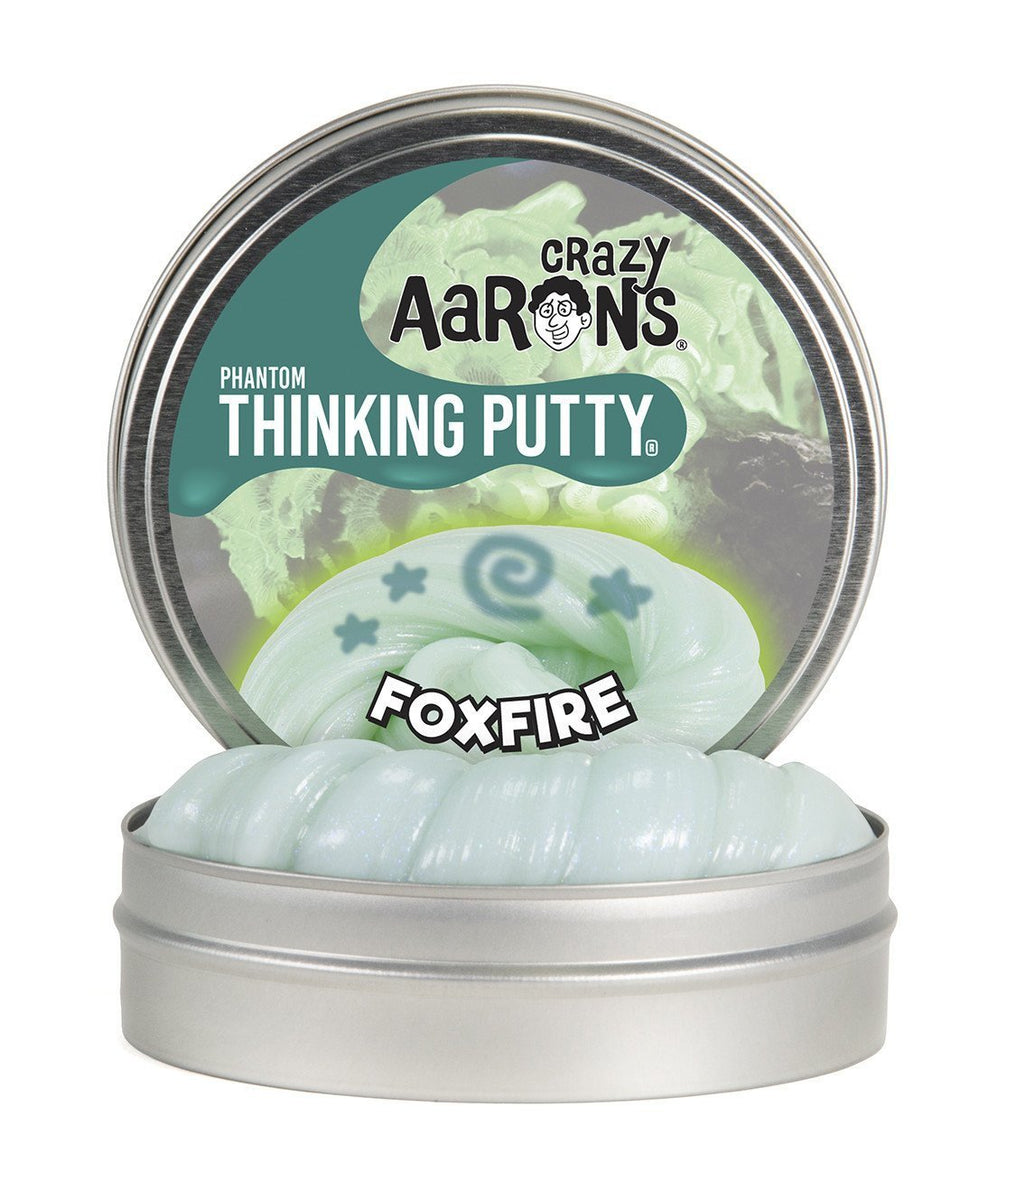 new crazy aaron's thinking putty